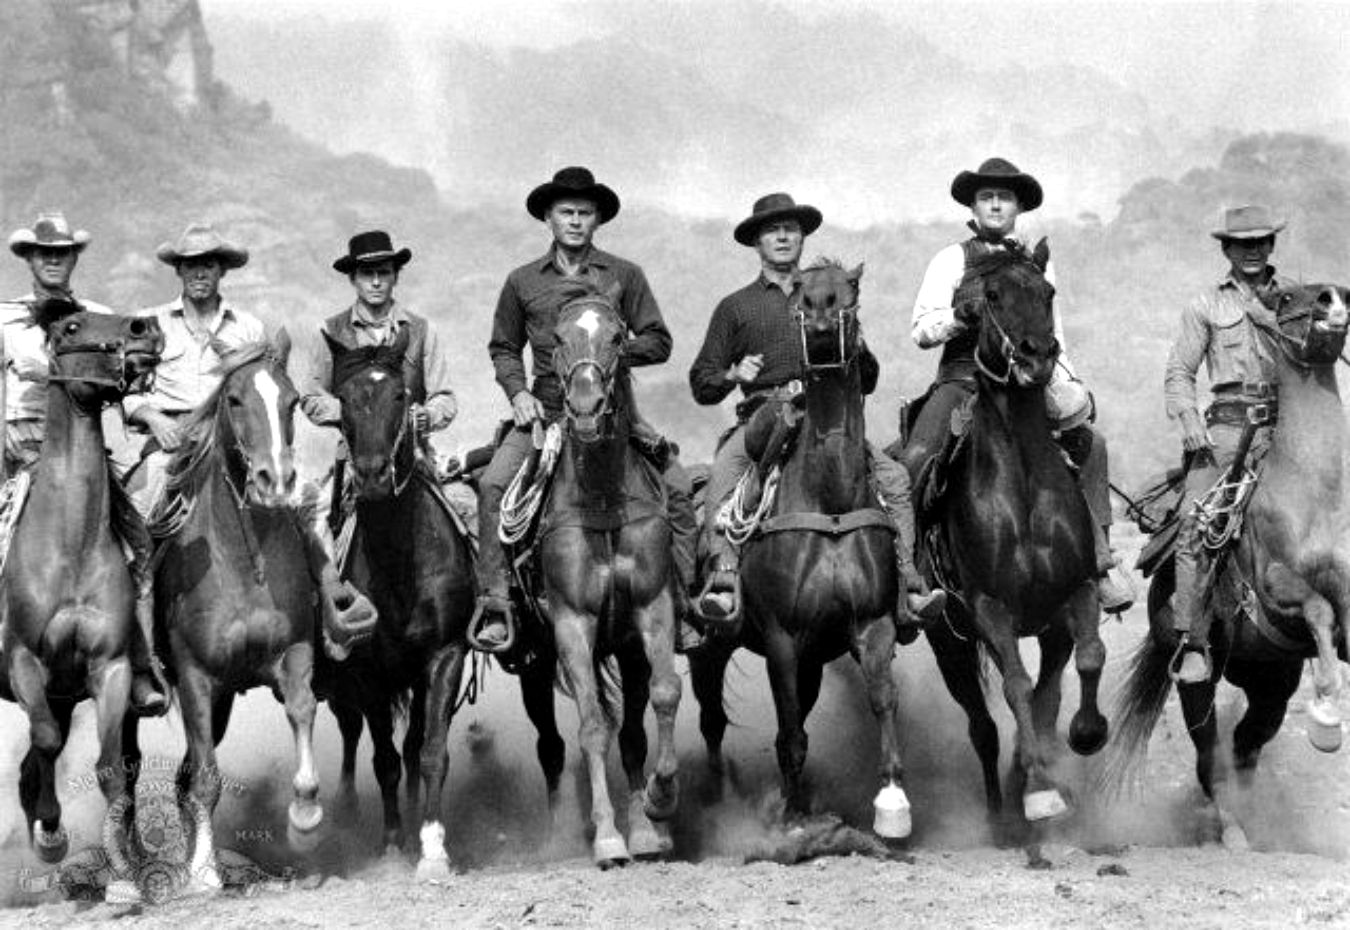 THE MAGNIFICENT 7 riding